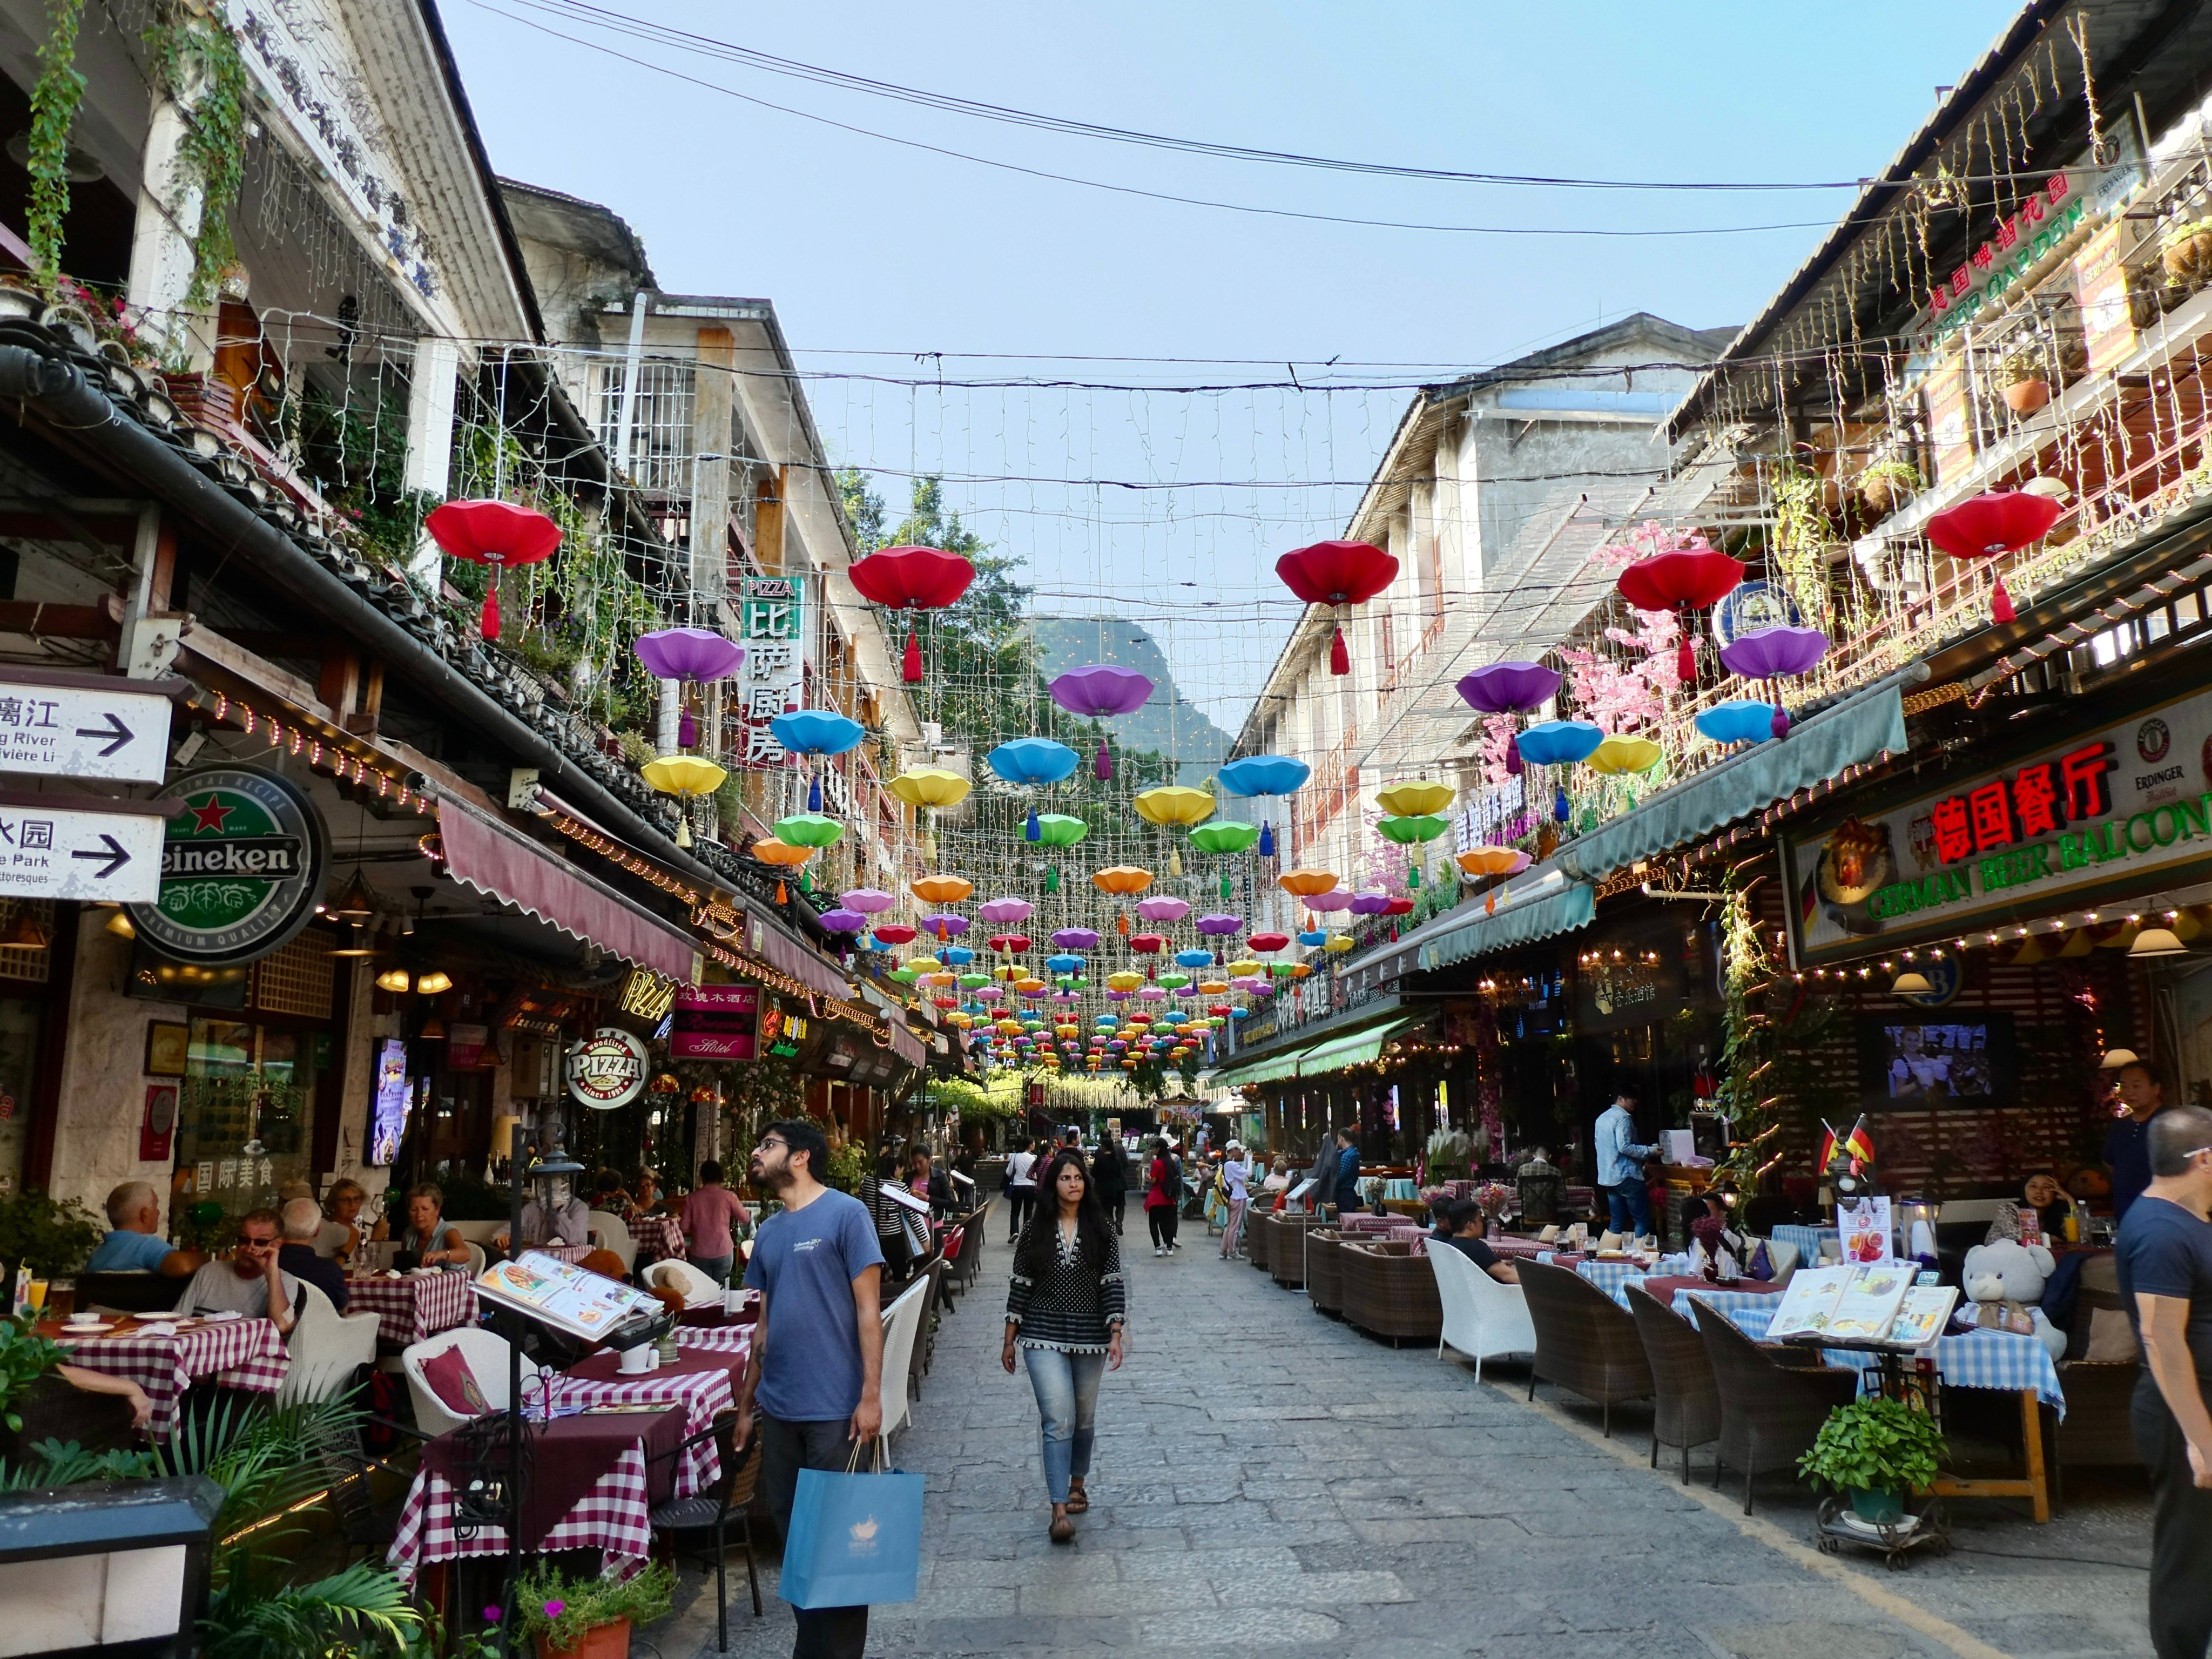 The former backpacker mecca of Yangshuo, China has slowly transformed to cater to local tourists, the finishing touches prompted by the Covid-19 pandemic. Photo: Shutterstock